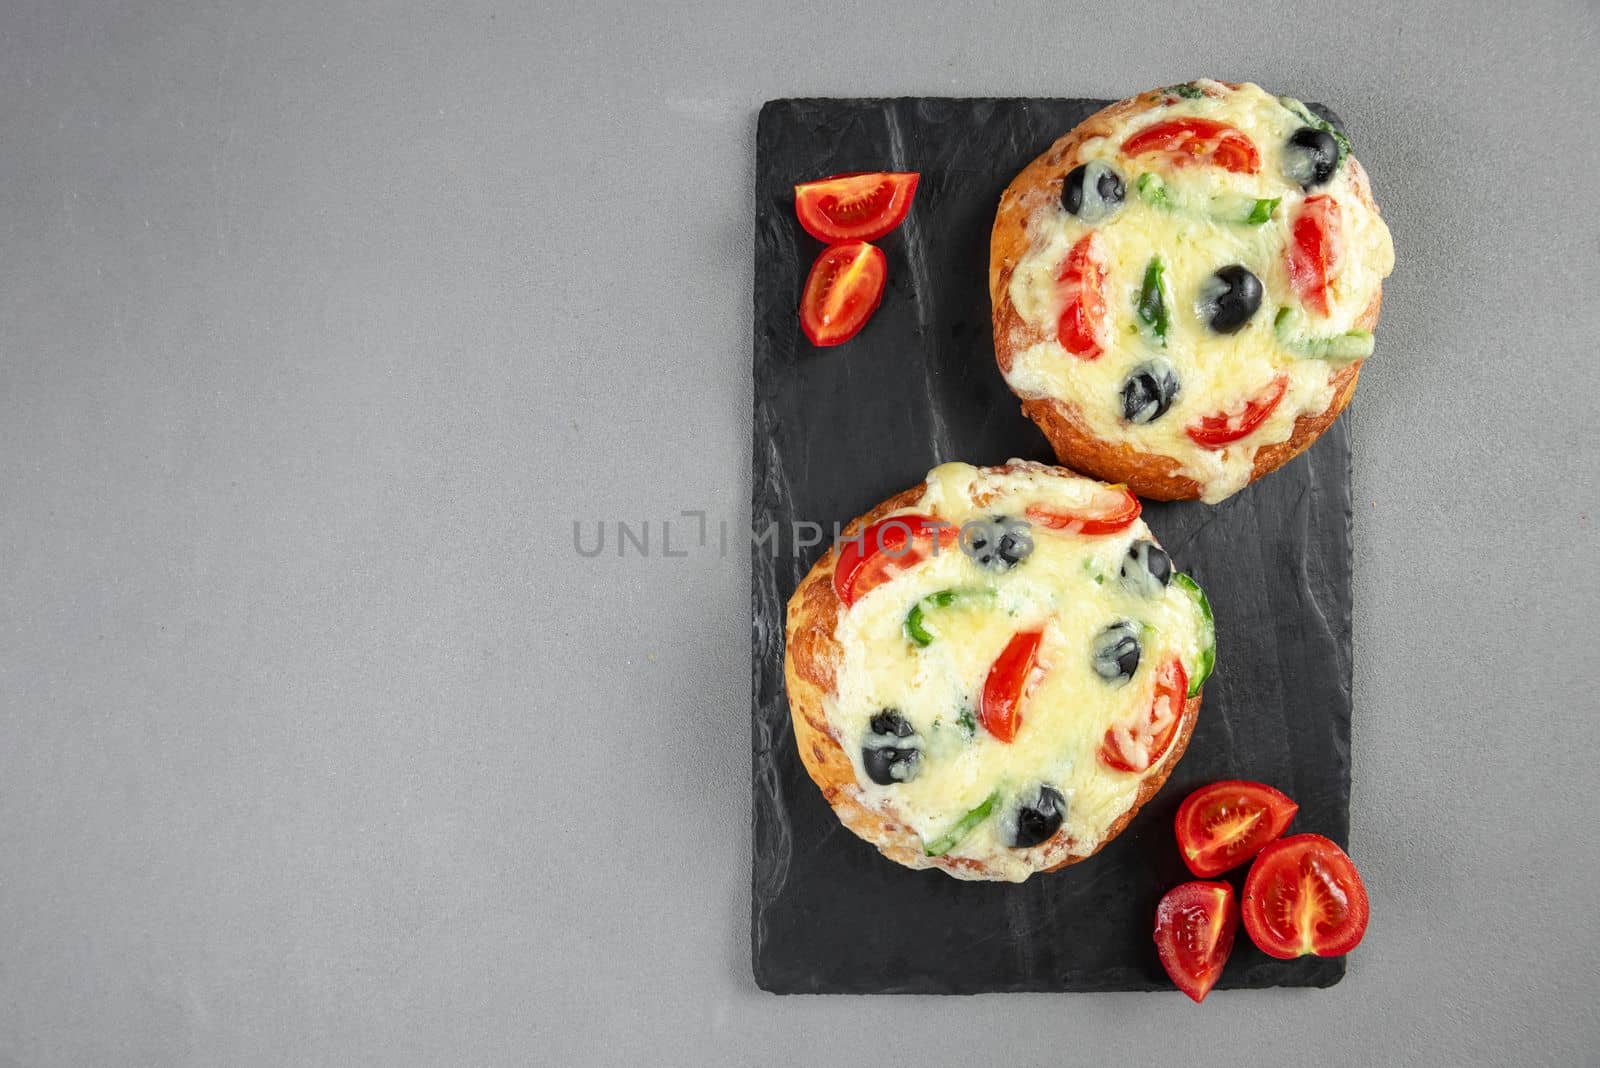 Indian tortillas, homemade pizza in India on a gray background. Blank space for text. Copy space